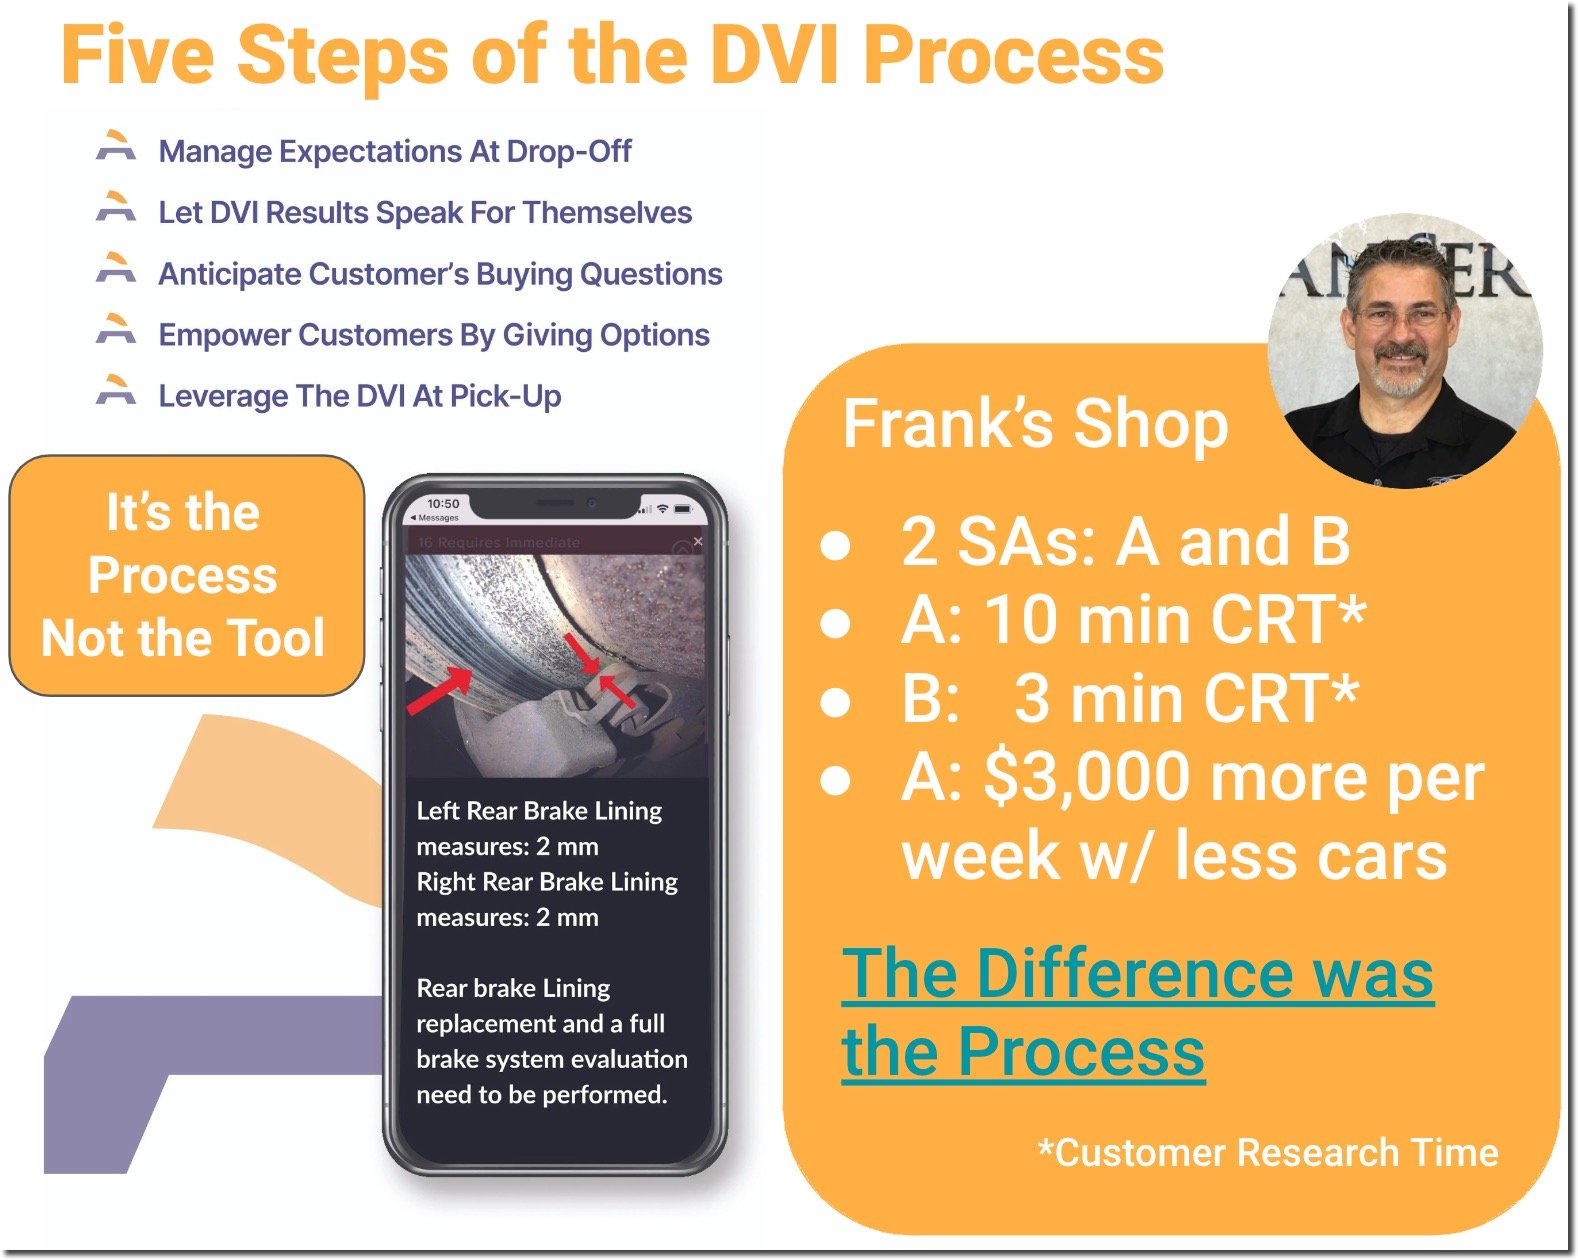 The DVI Process Training for Service Advisors focuses on best practices increasing the Approval Rate significantly